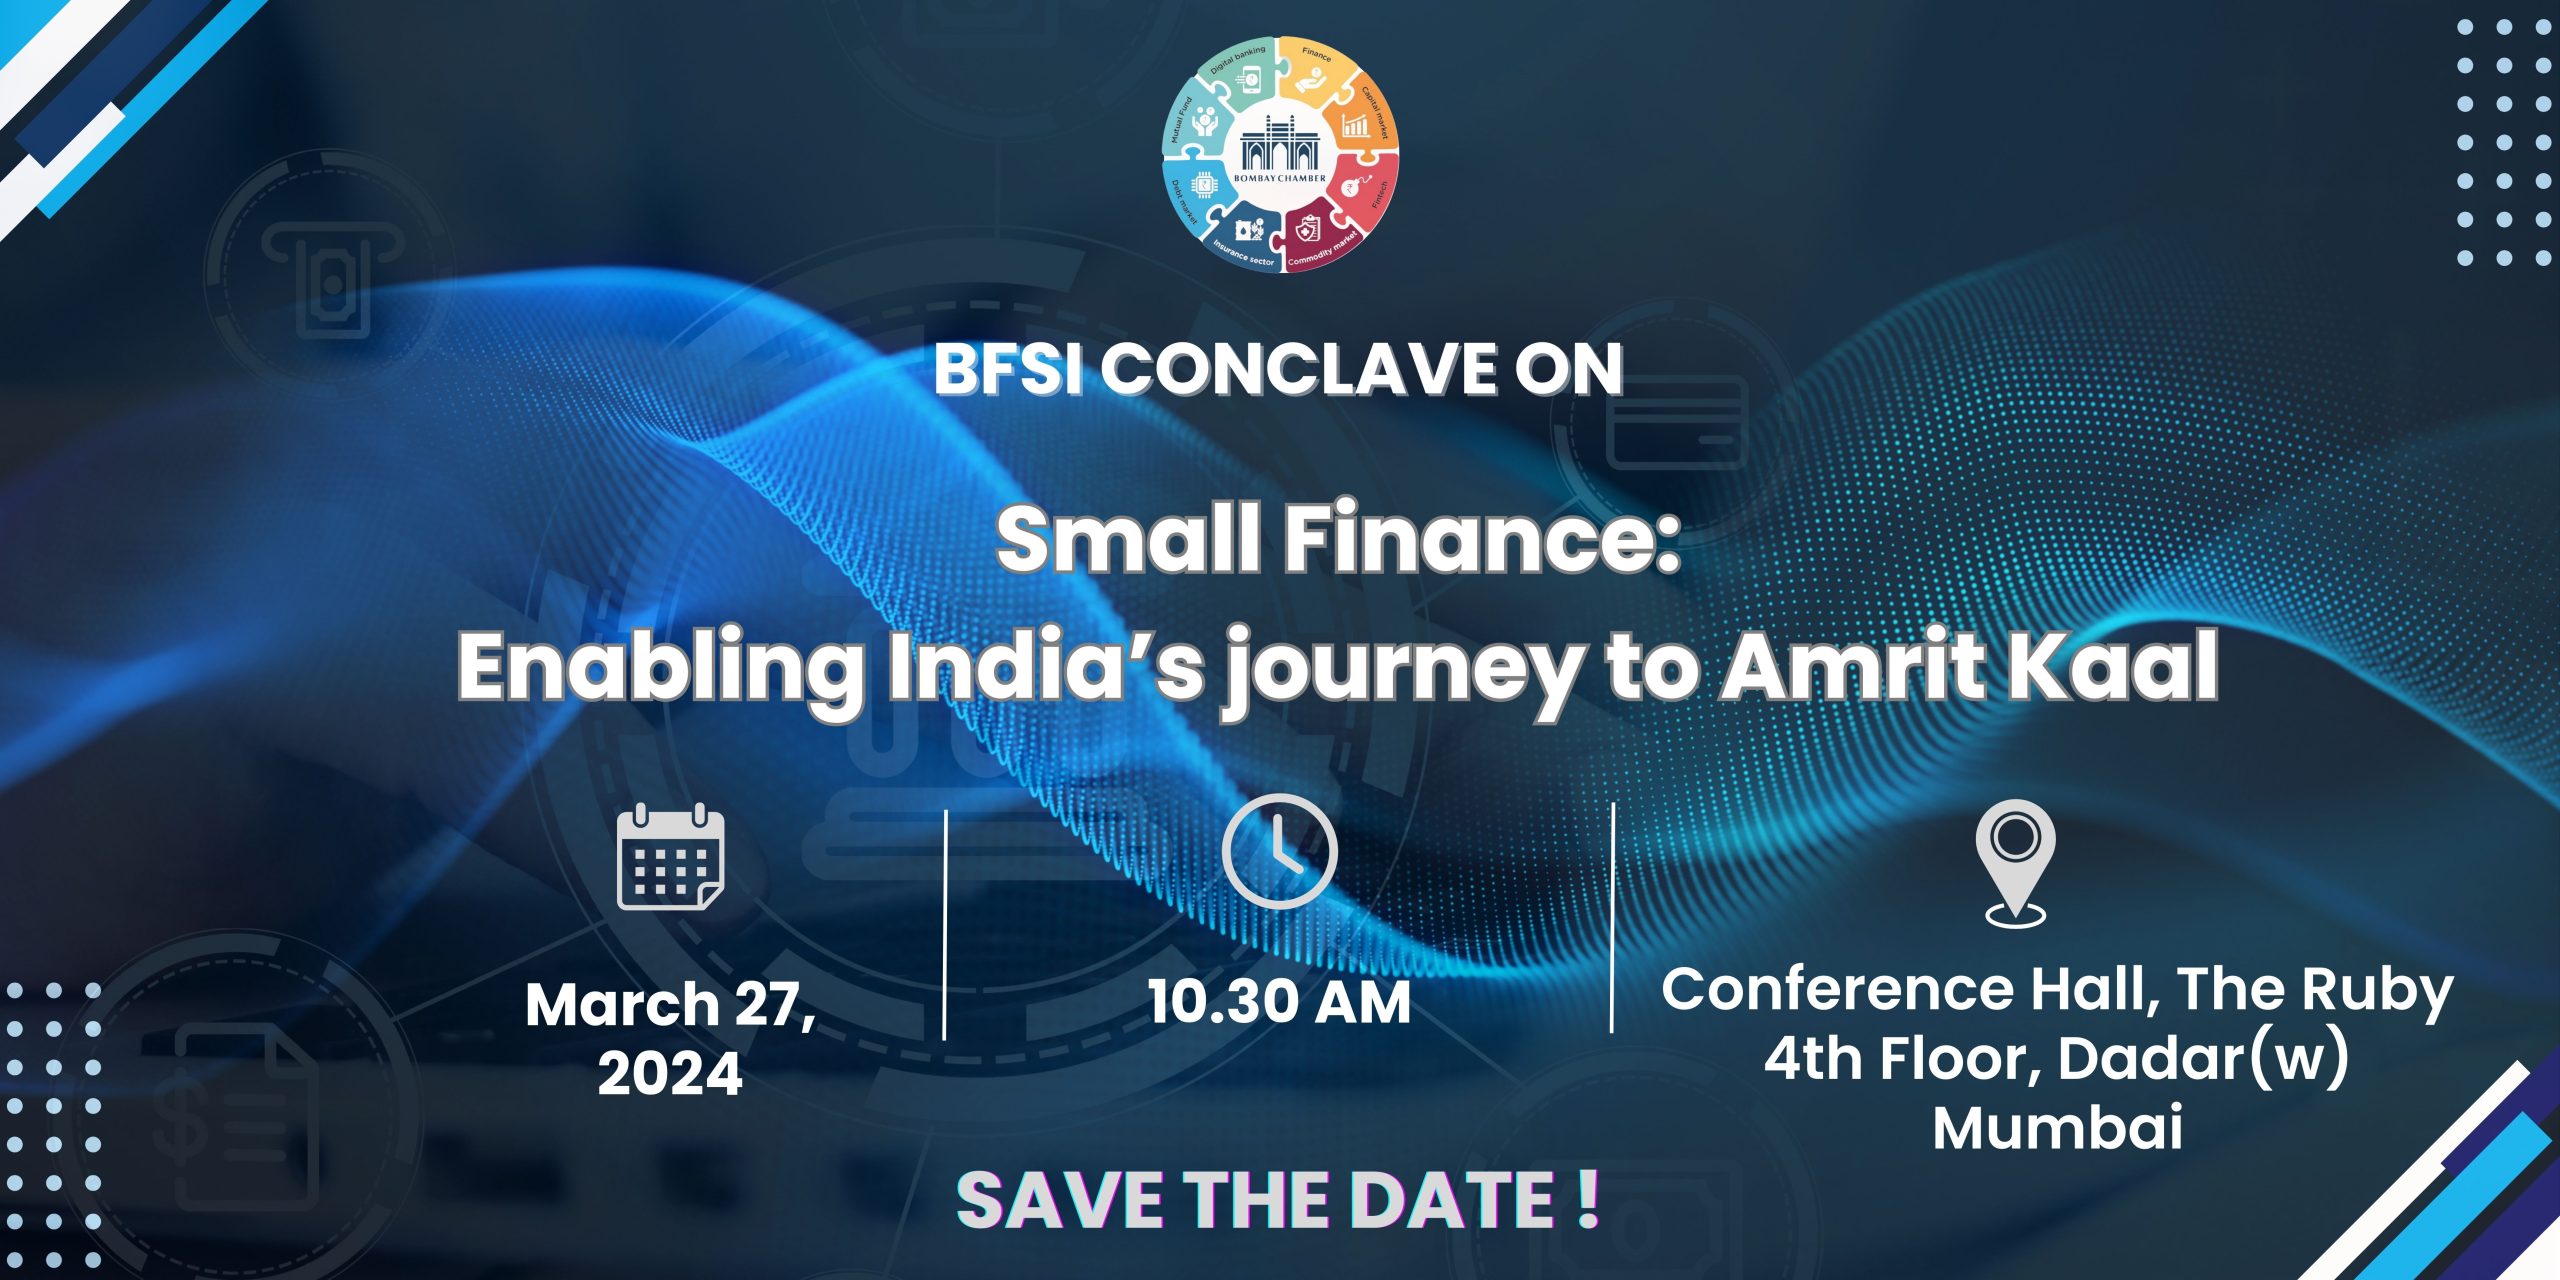 Small Finance: Enabling India’s journey to Amrit Kaal